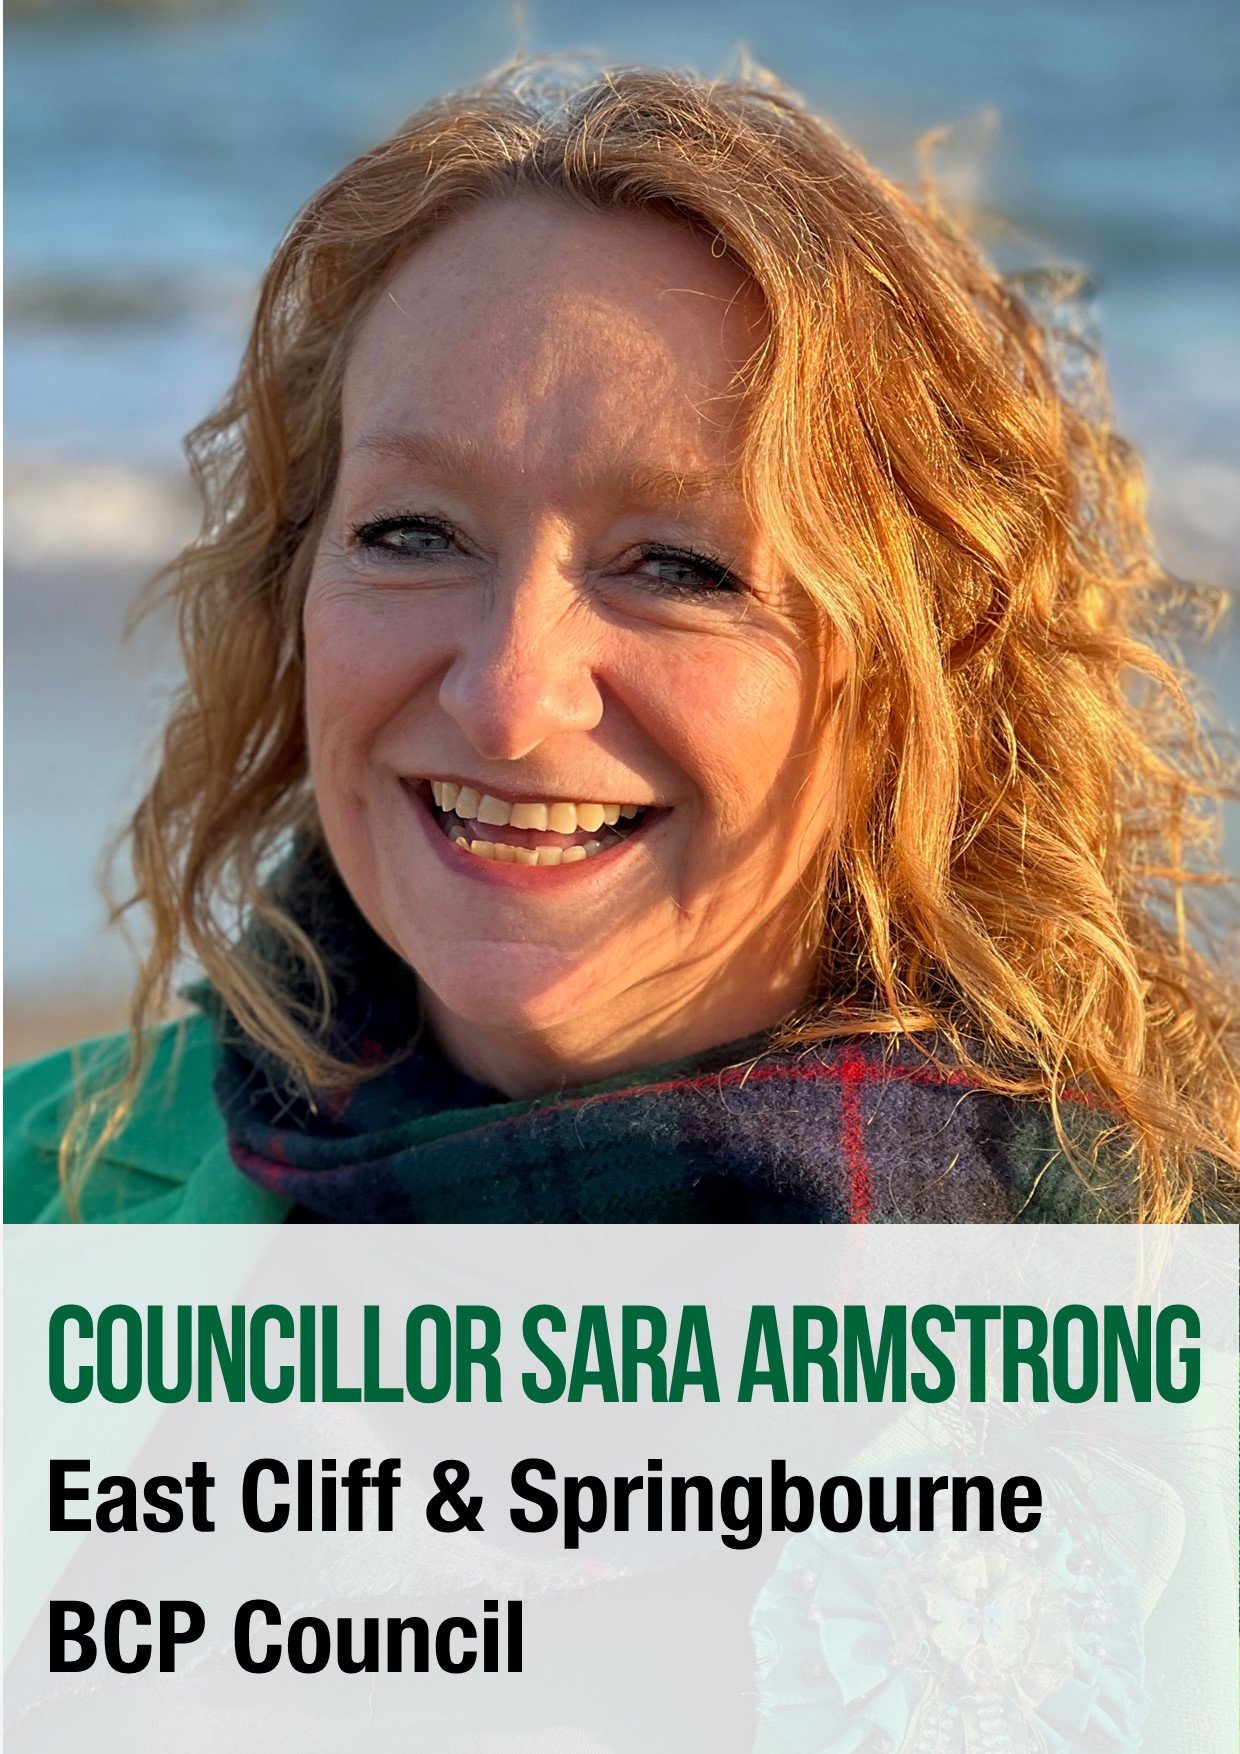 Cllr Sara Armstrong - East Cliff & Soringbourne